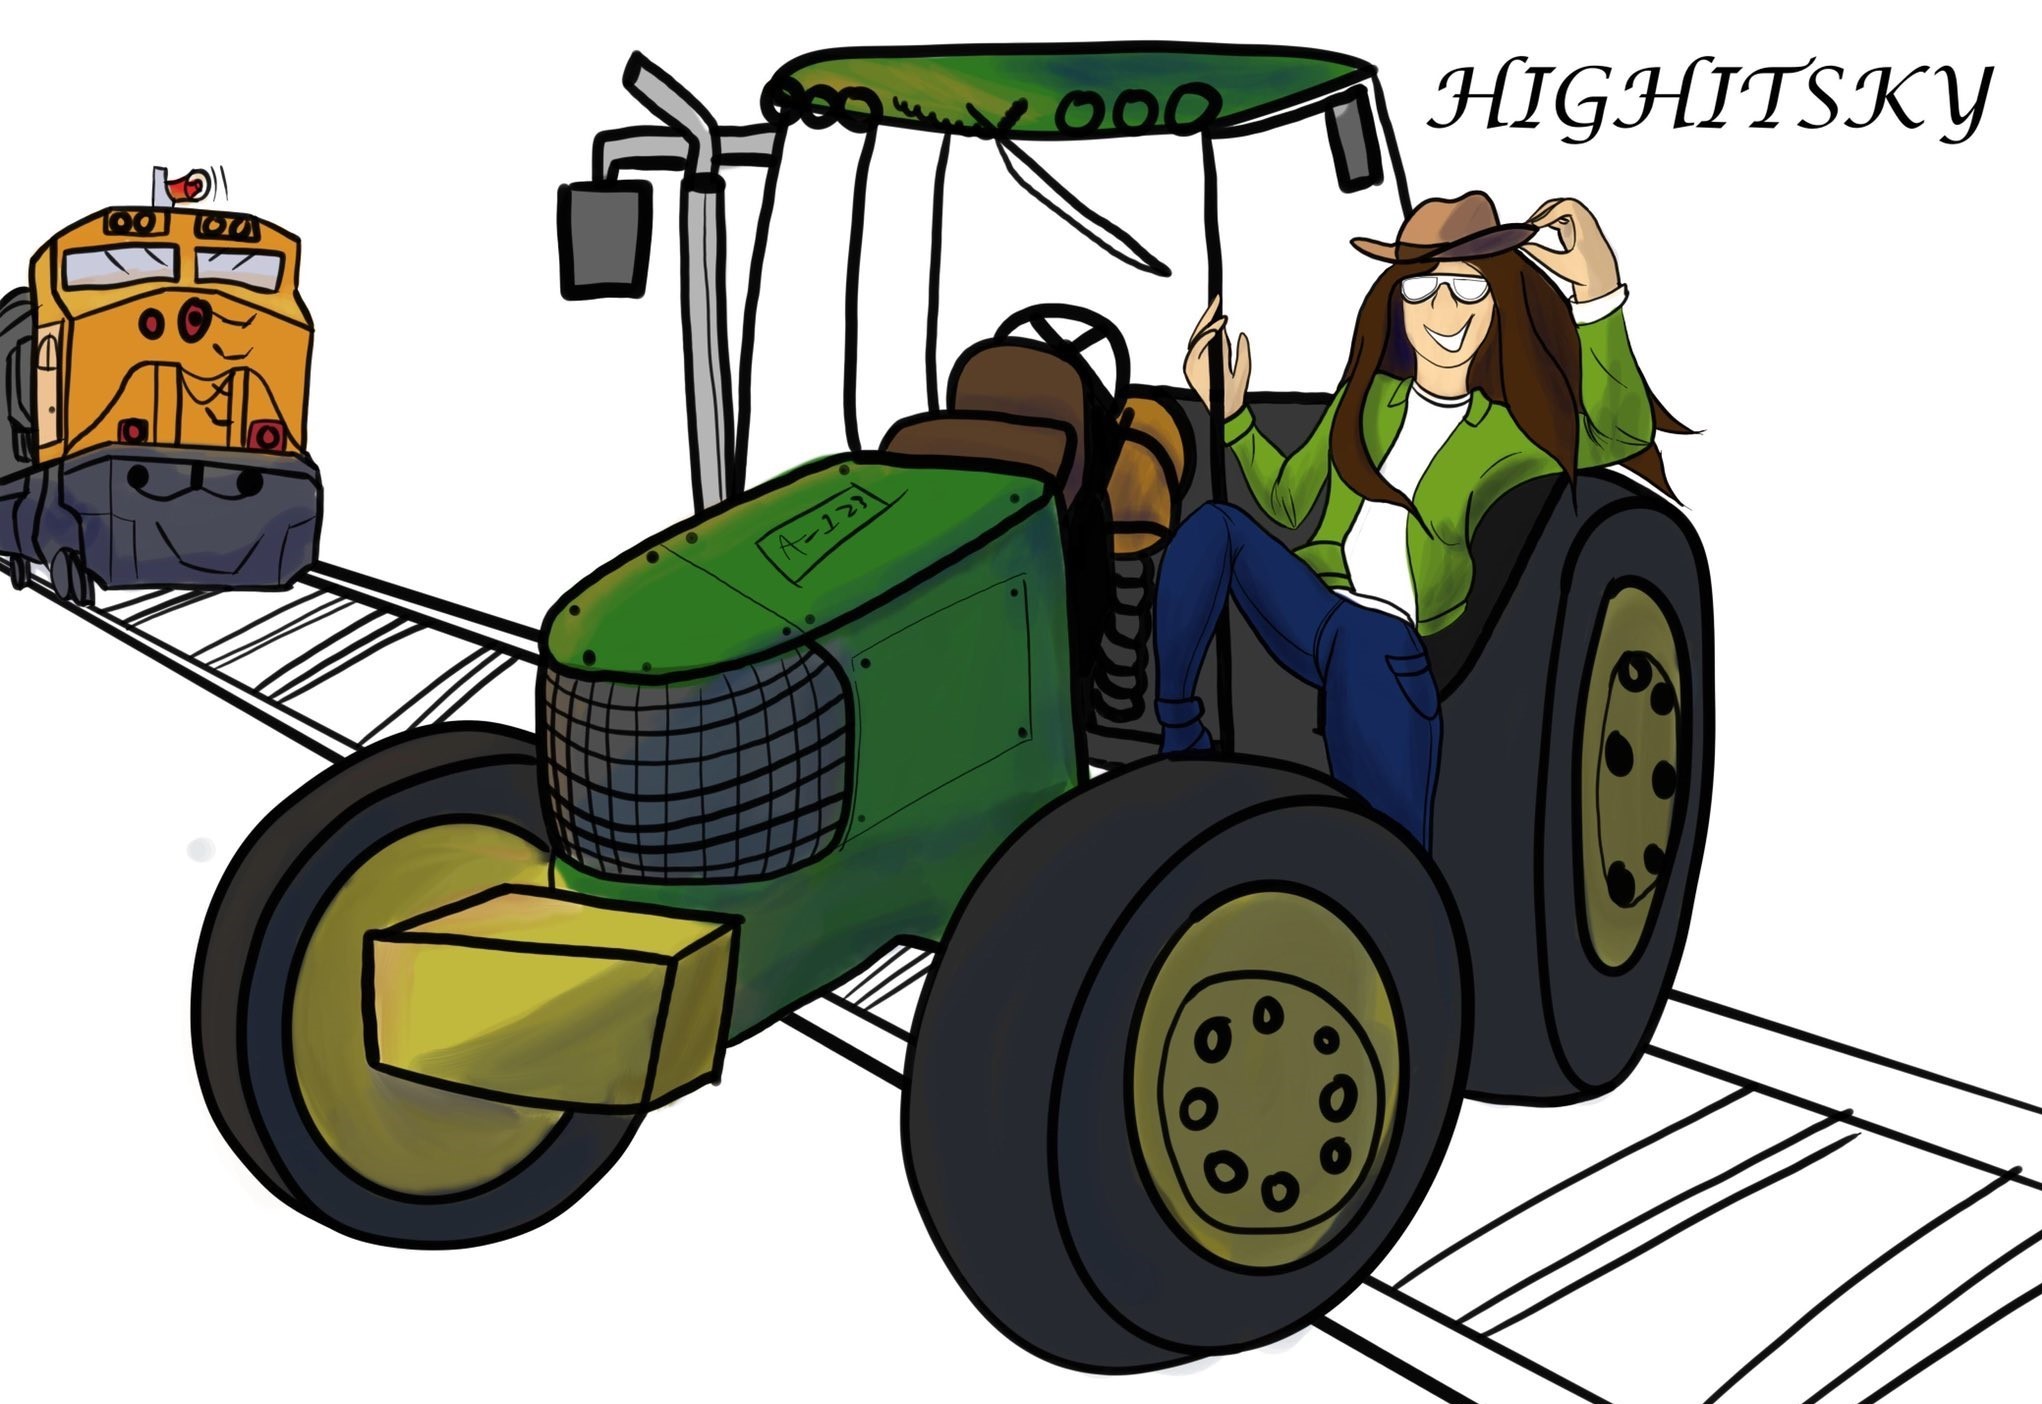 Digital drawing of Ky driving a green tractor over train tracks while a train chugs away in the distance